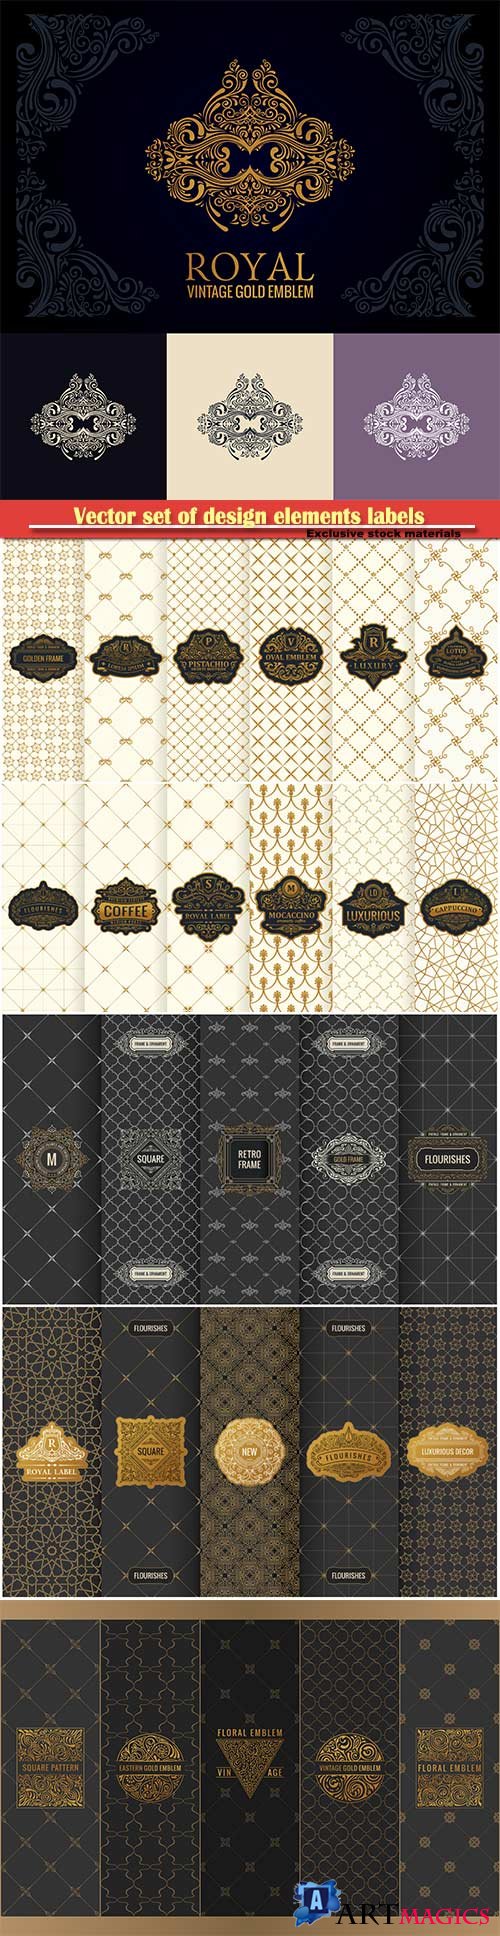 Vector set of design elements labels, icon, logo, frame, luxury packaging